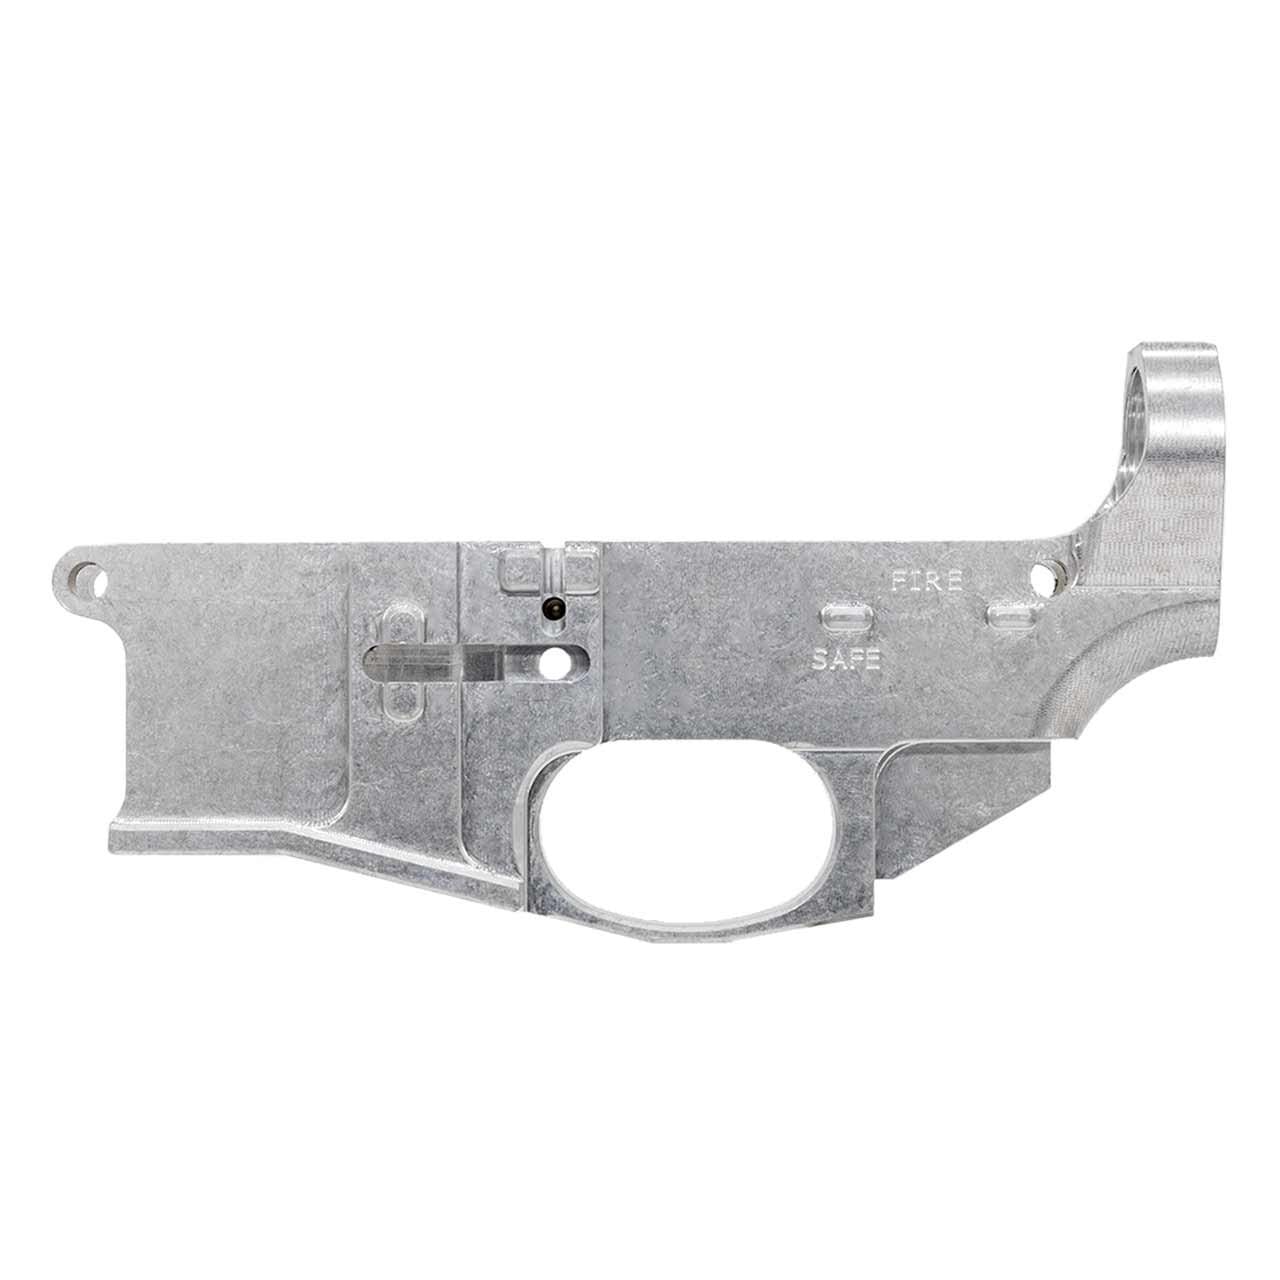 Image of Premium 80% Lower Fire/Safe Marked - Billet Raw